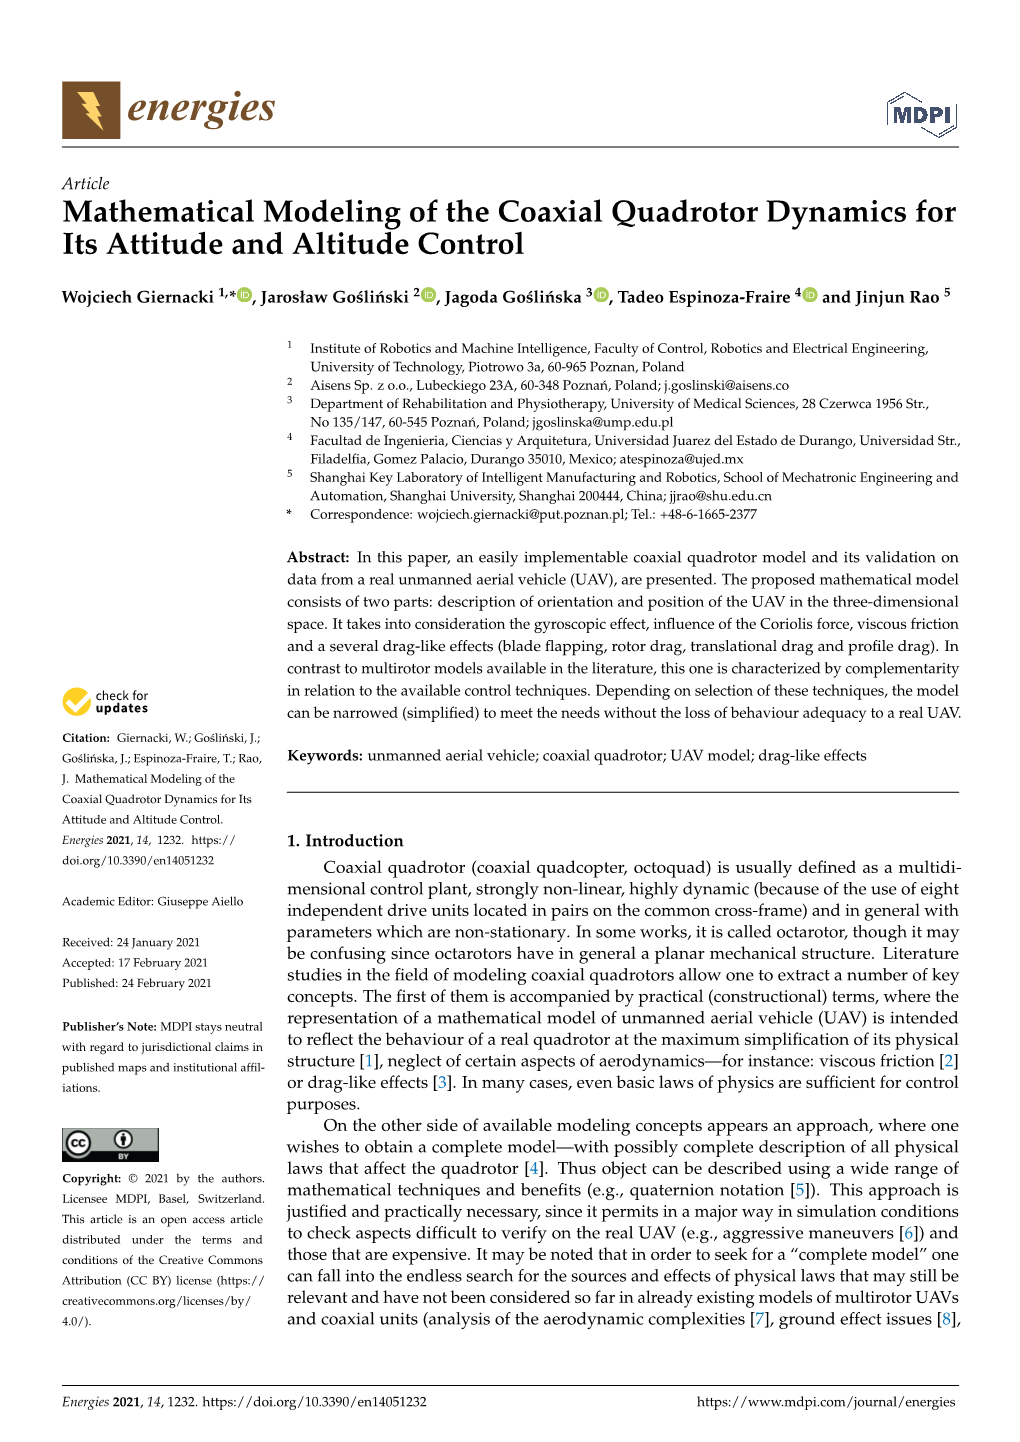 Mathematical Modeling of the Coaxial Quadrotor Dynamics for Its Attitude and Altitude Control